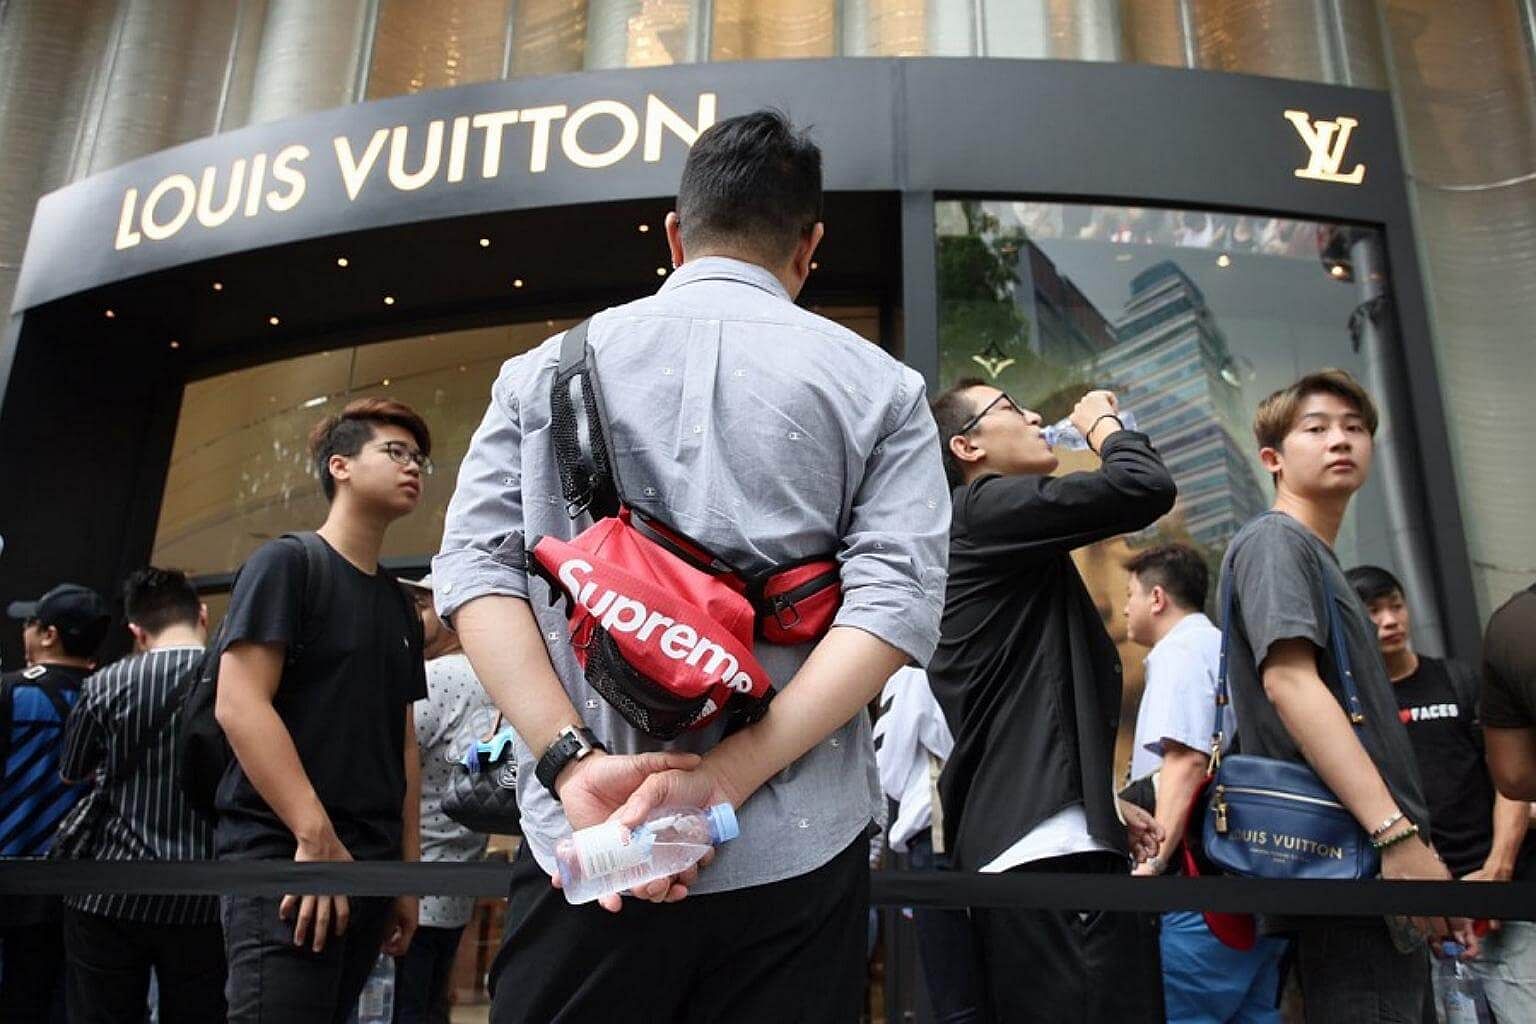 The Supreme x Louis Vuitton Collab Is Here But, Is It Worth It